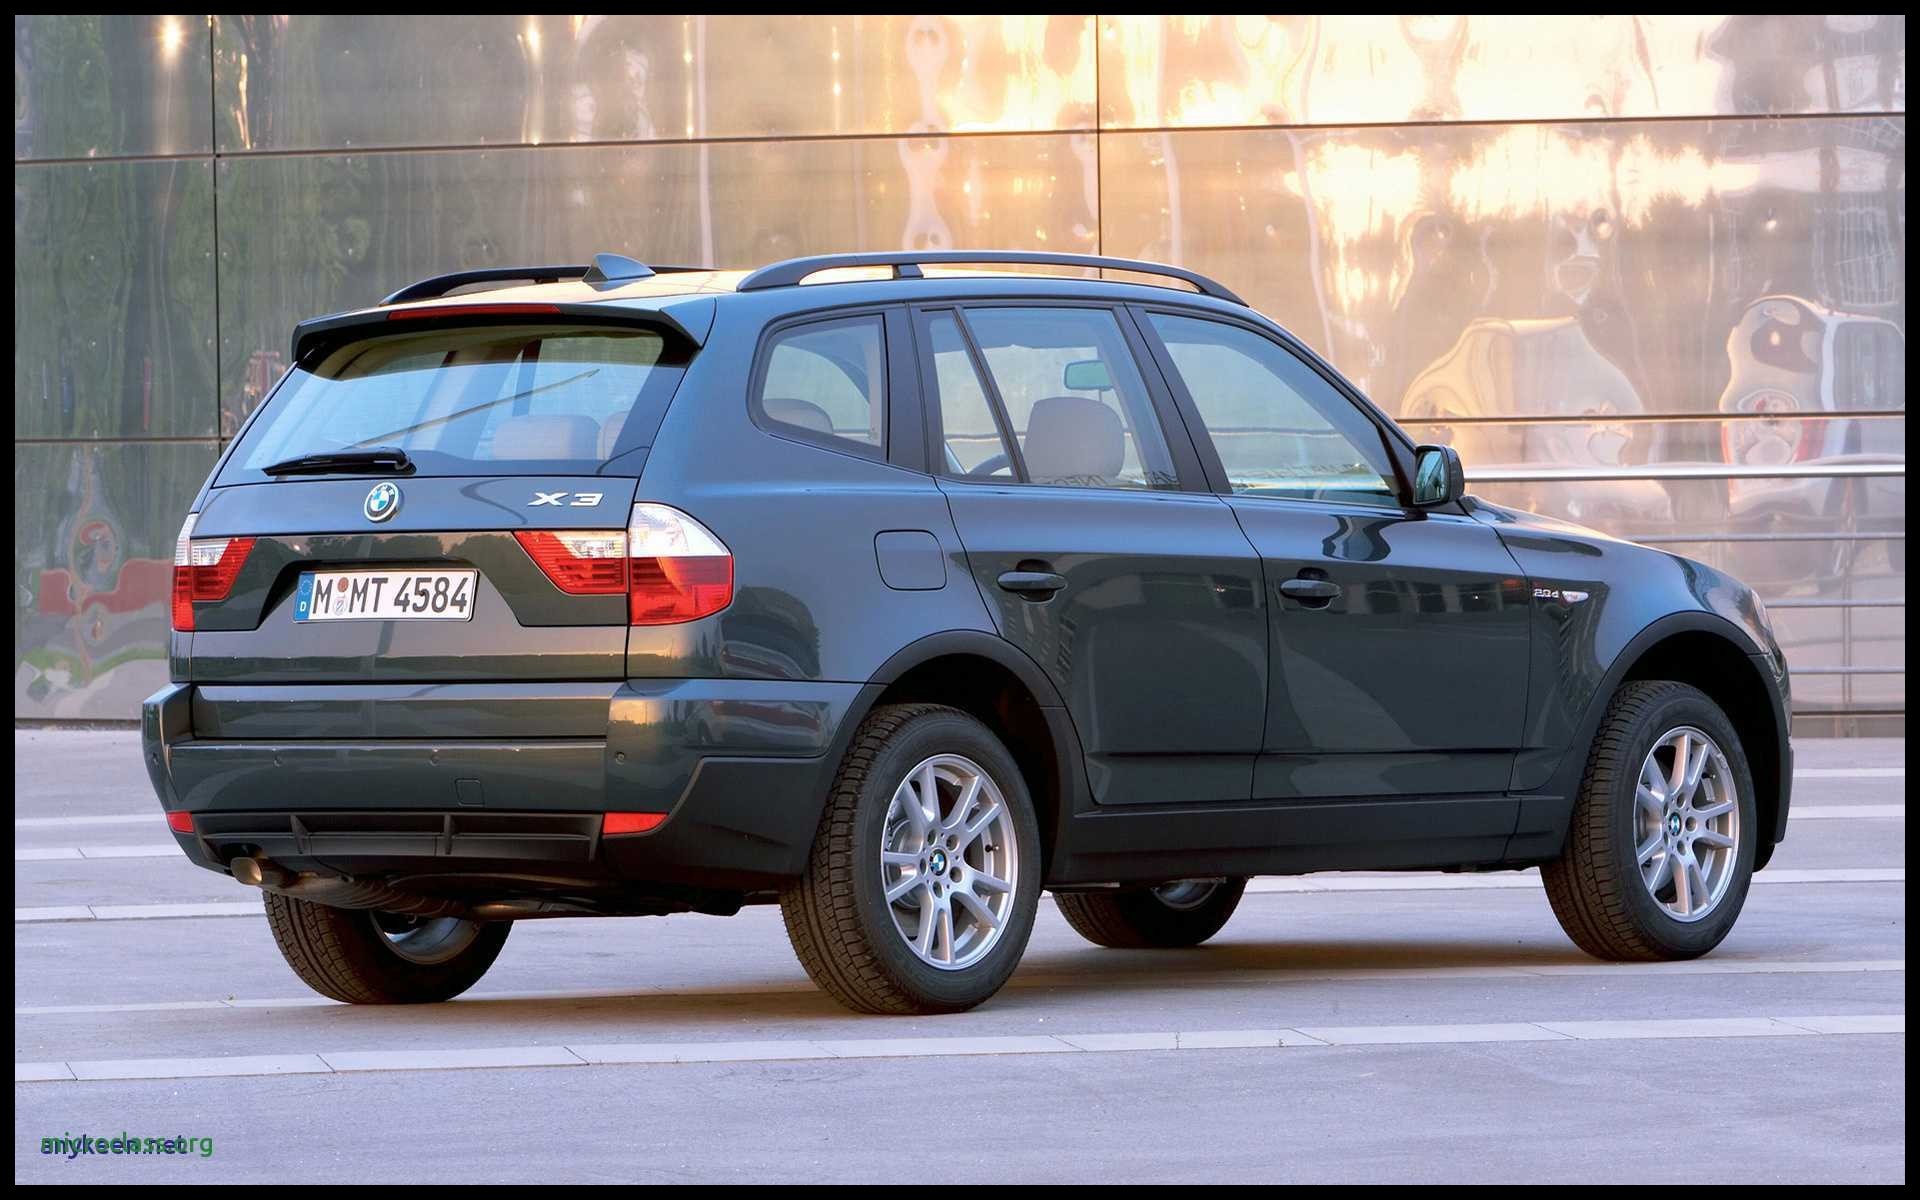 Bmw Wallpaper Luxury Bmw X3 2 0d 2007 Wallpapers And Hd Car Pixel Cool Car Tyre Wallpaper